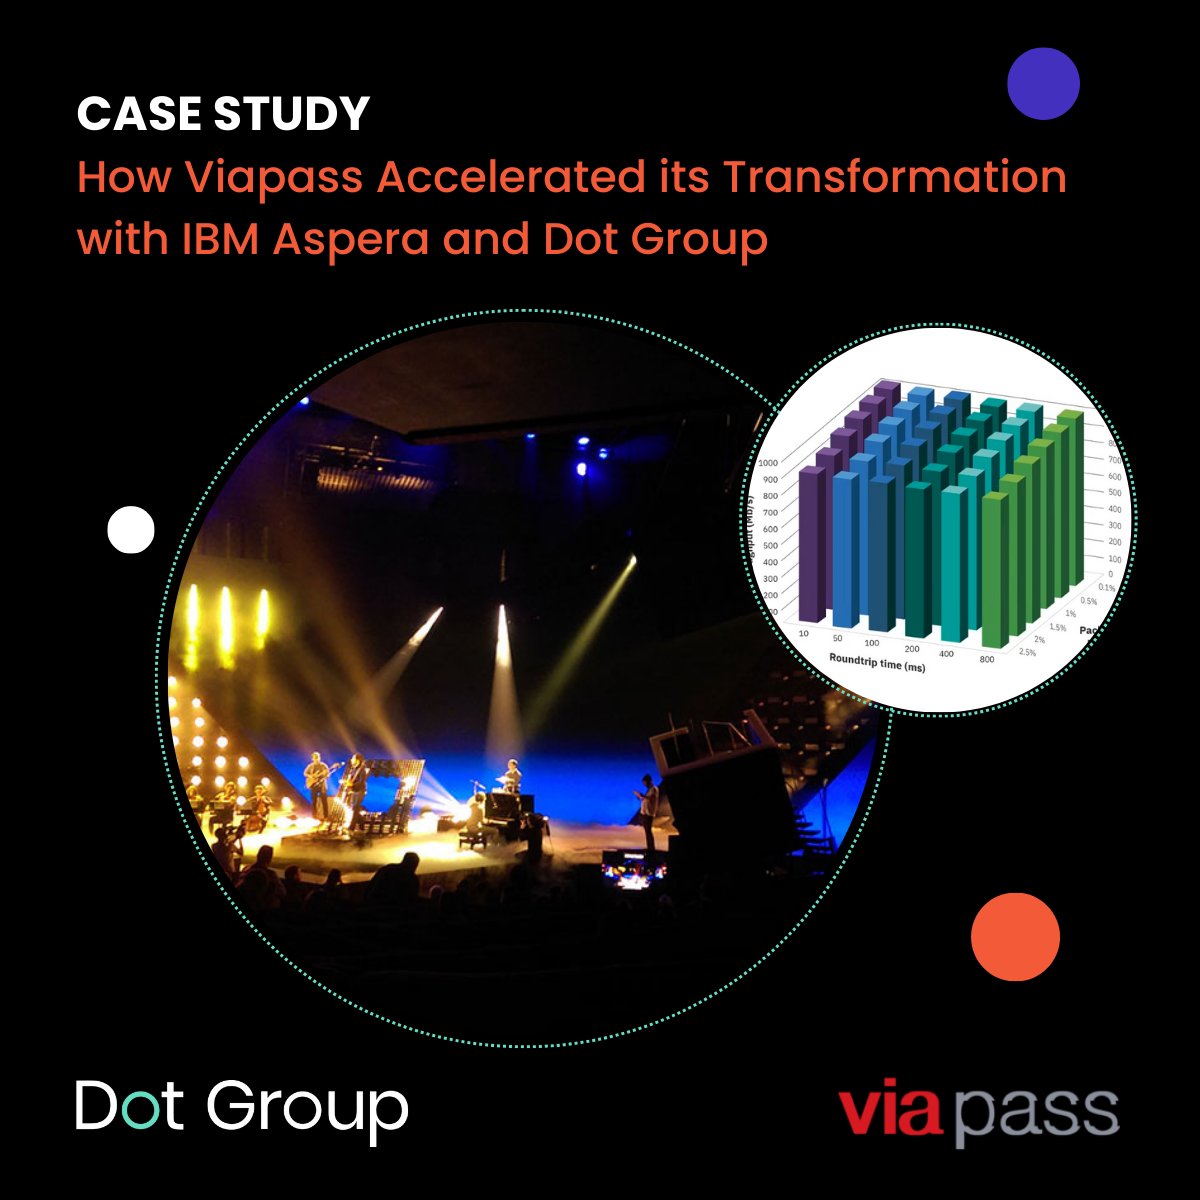 “Adopting #IBMAspera’s technology was a game-changer for us. It not only revolutionised our #filetransfer process but elevated our service quality in the high-pressure environment of event management.” Read more from #Viapass CEO Jean-Pierre Kaisserlian at bit.ly/4awwUjz